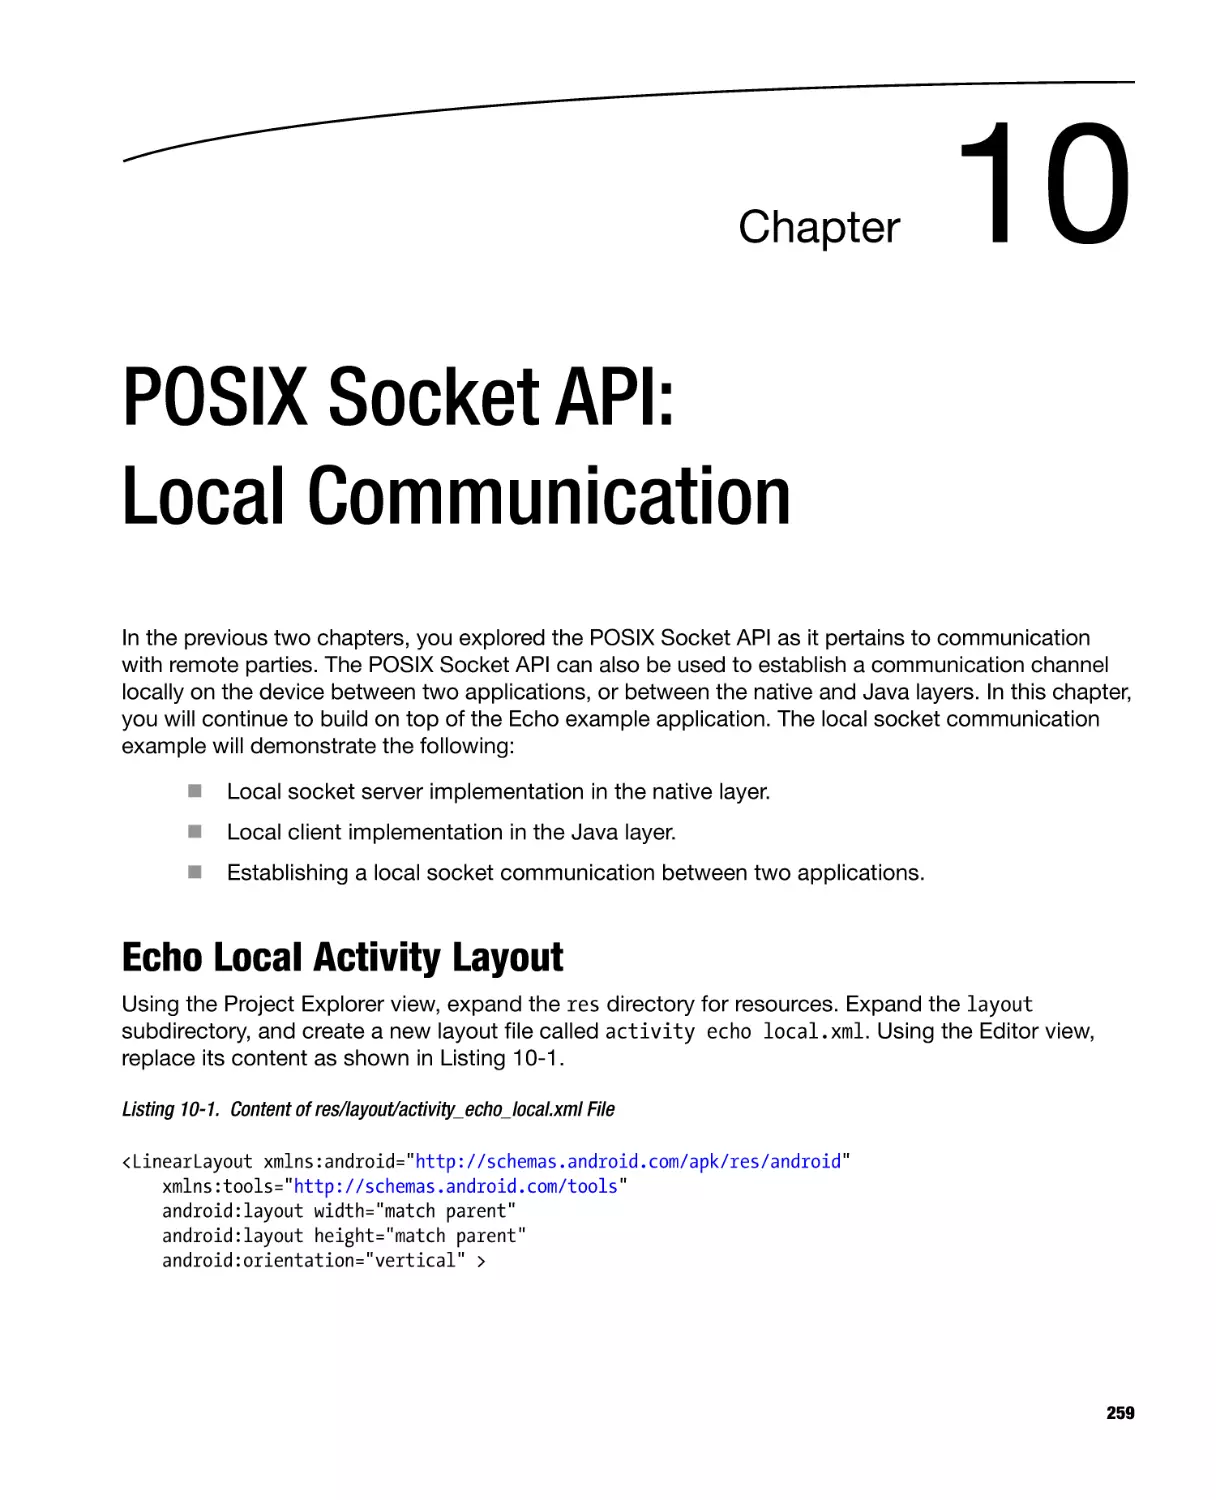 Chapter 10
Echo Local Activity Layout